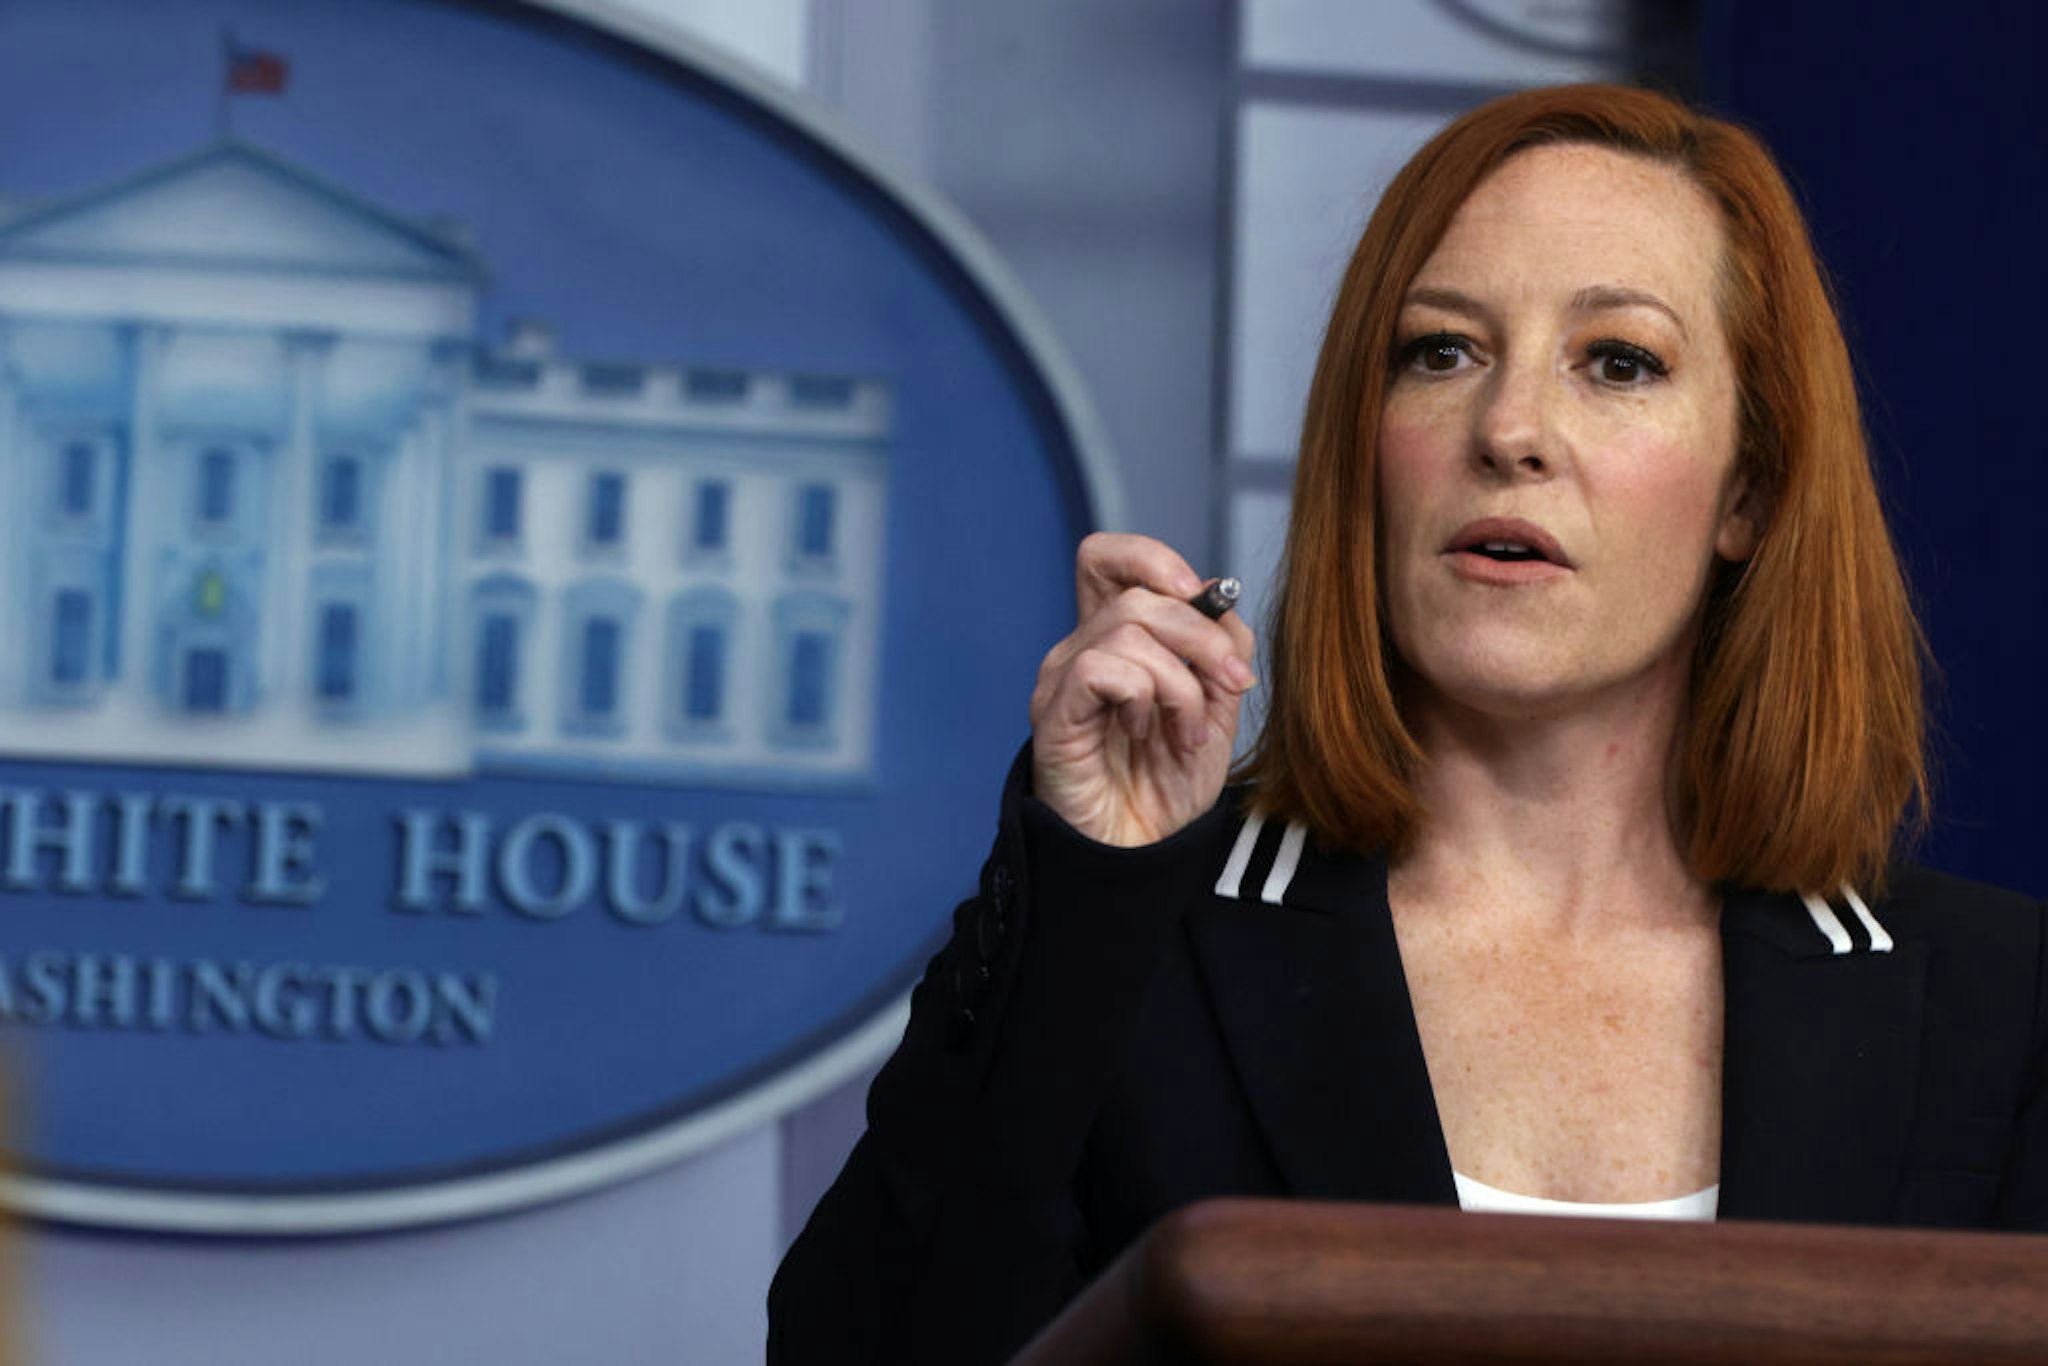 WASHINGTON, DC - APRIL 21: White House Press Secretary Jen Psaki speaks during a daily press briefing at the James Brady Press Briefing Room of the White House on April 21, 2021 in Washington, DC. Psaki held the daily briefing to answer questions from members of the press. (Photo by Alex Wong/Getty Images)